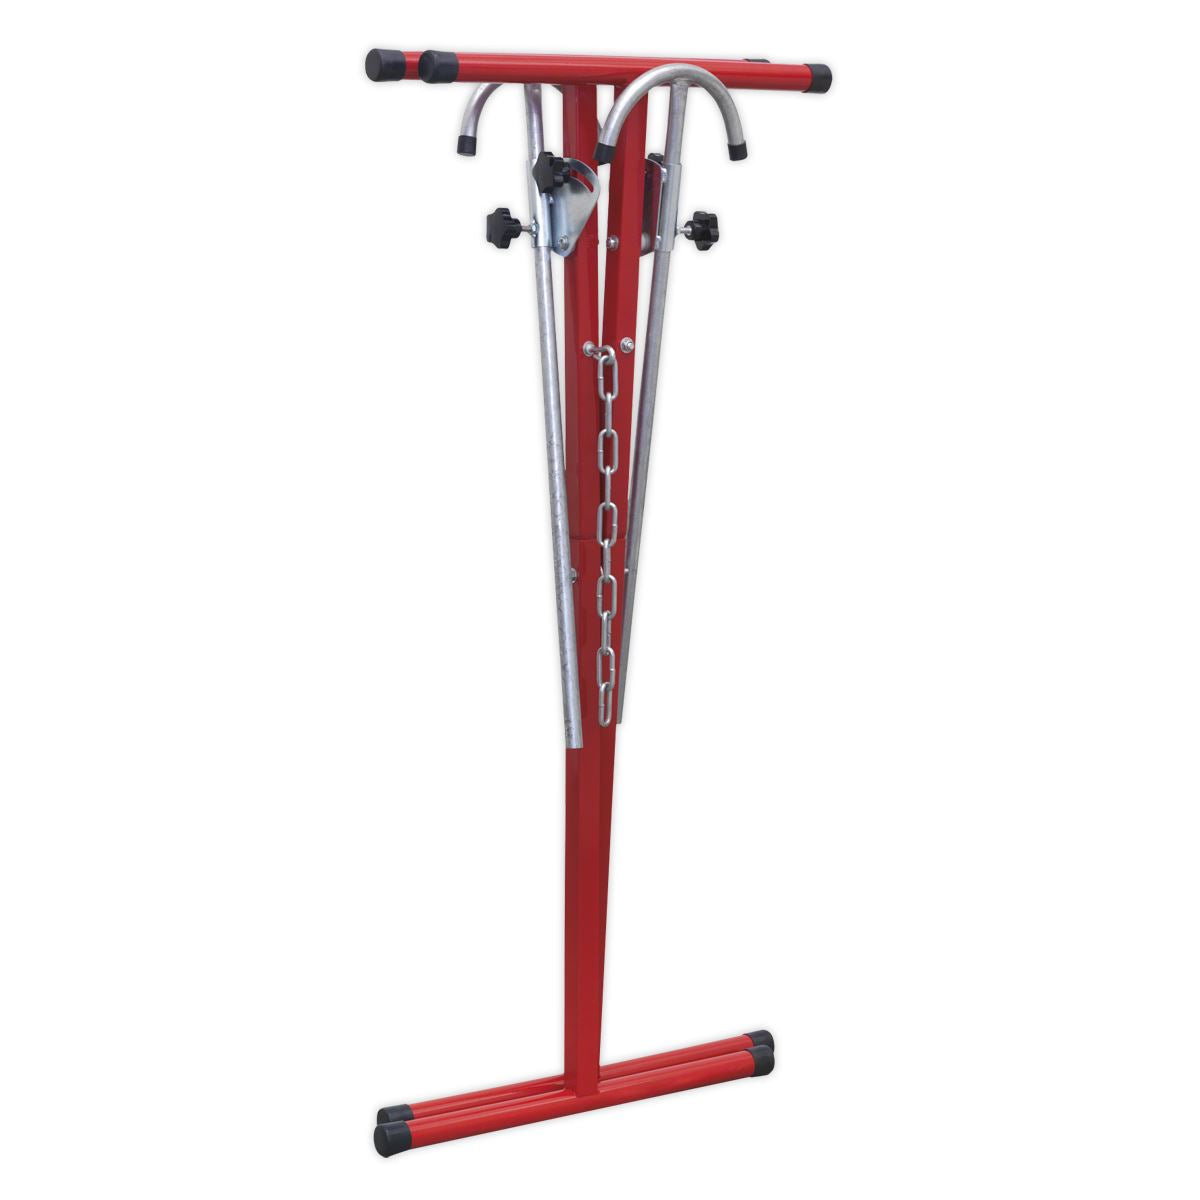 Sealey Folding Bumper Stand